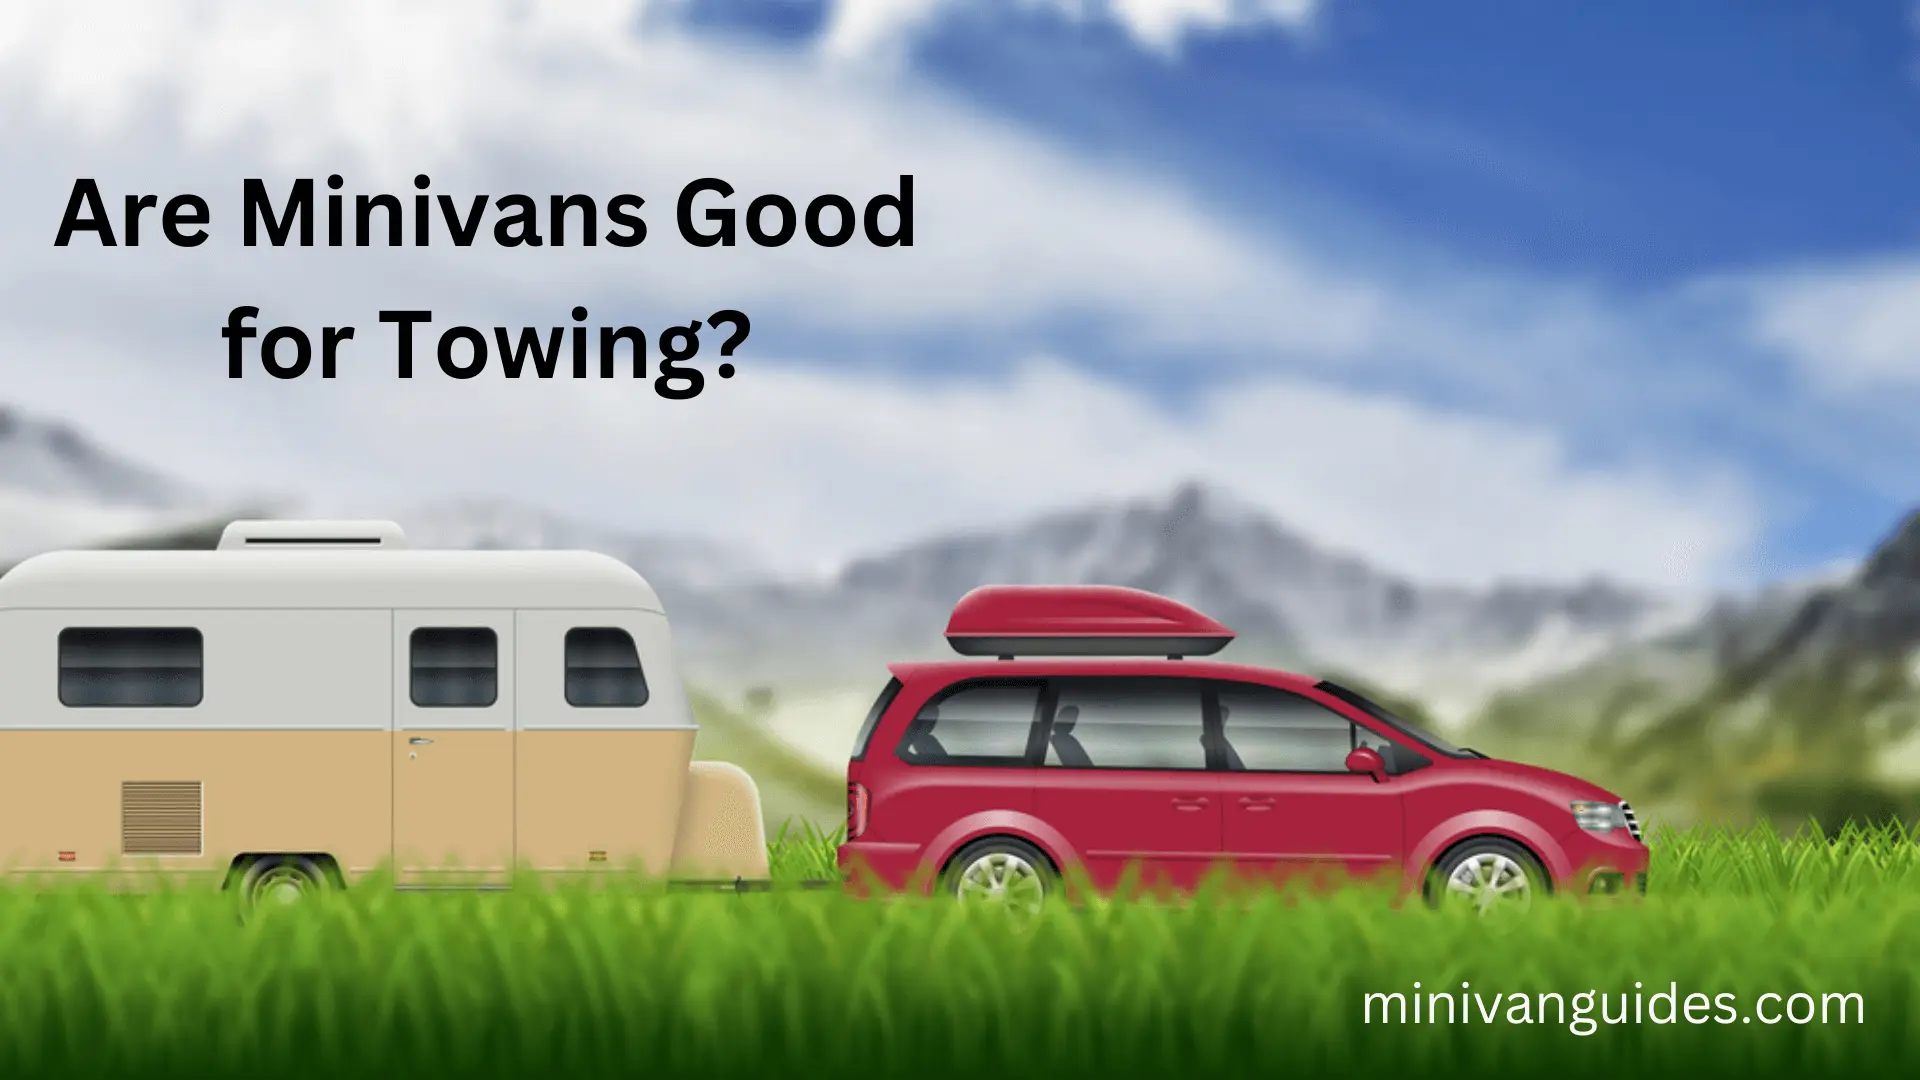 Are Minivans Good for Towing